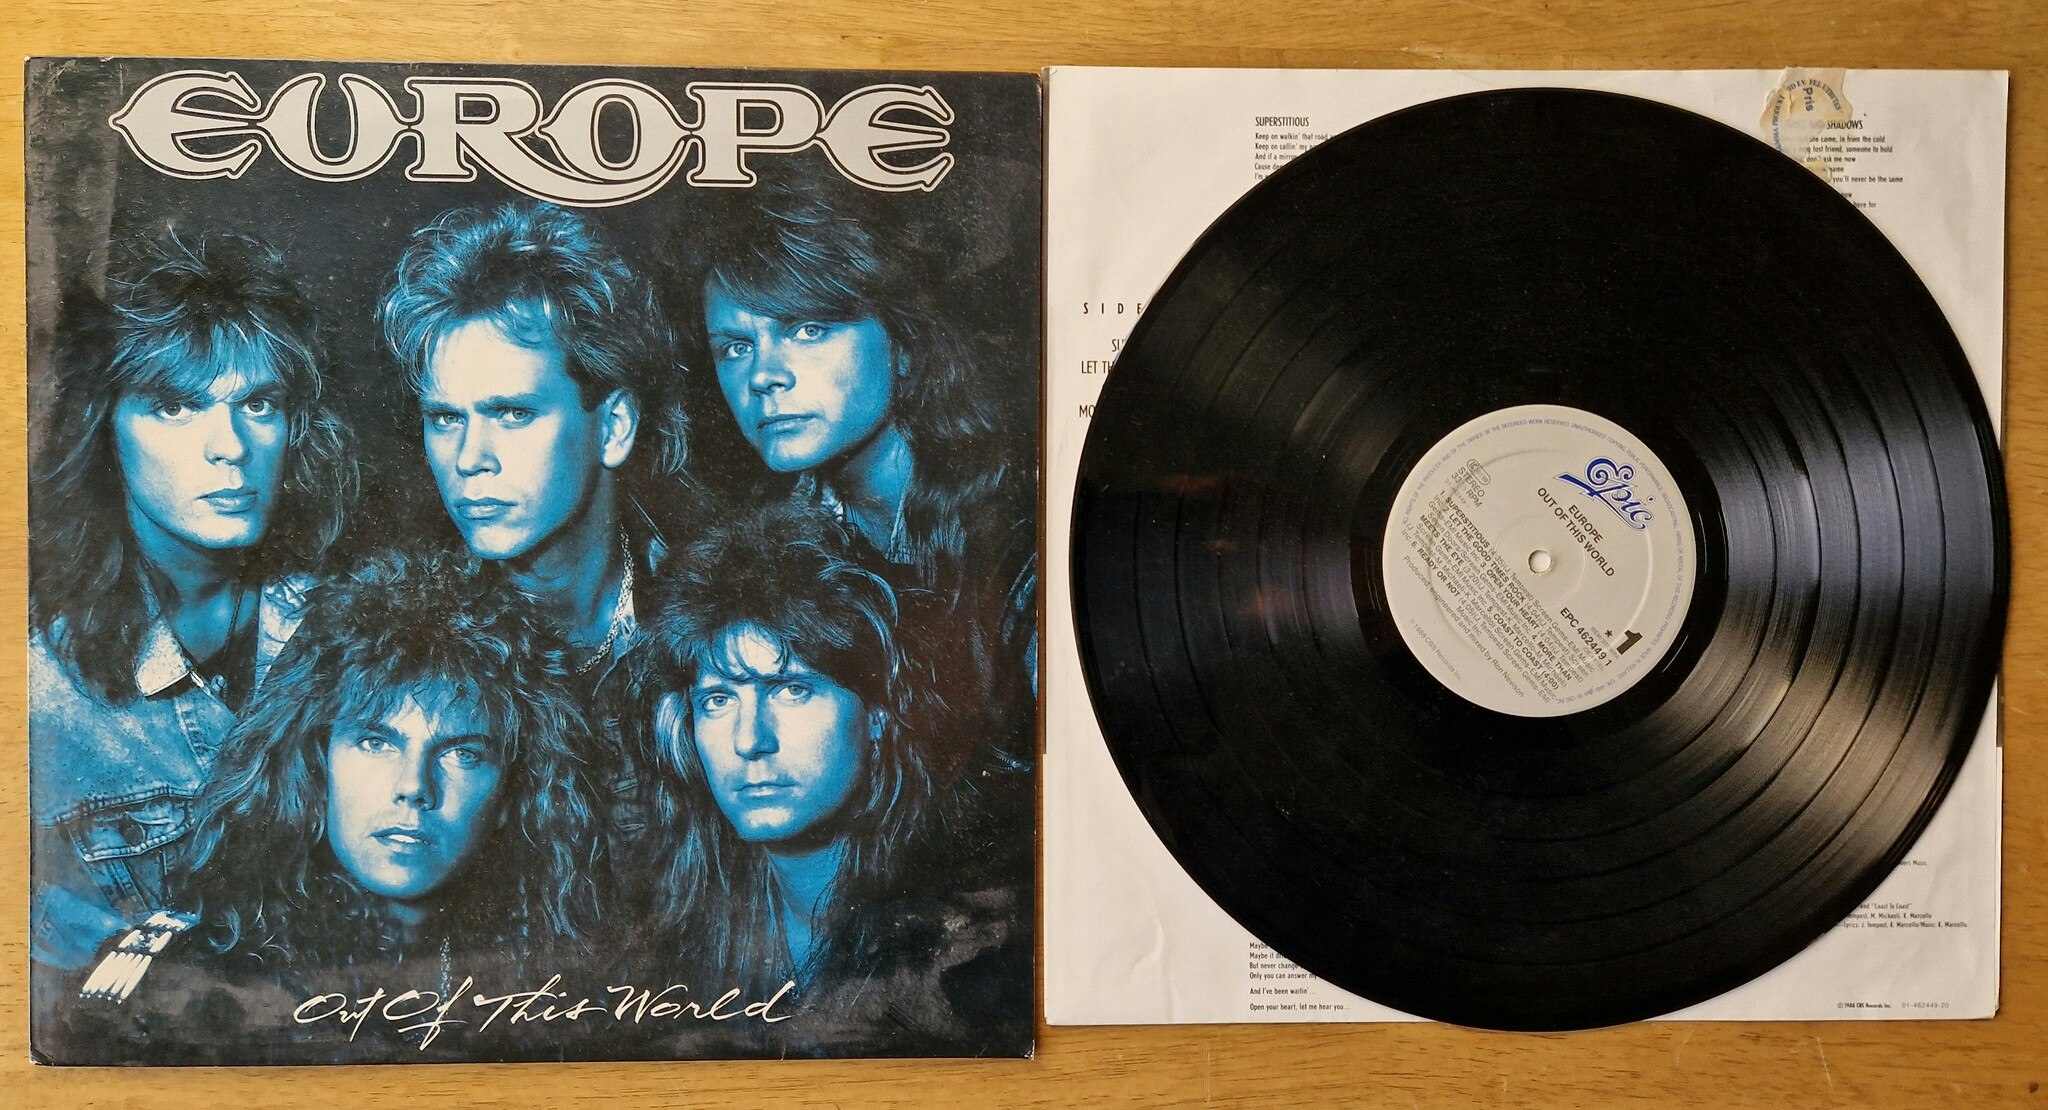 Europe, Out of this world. Vinyl LP